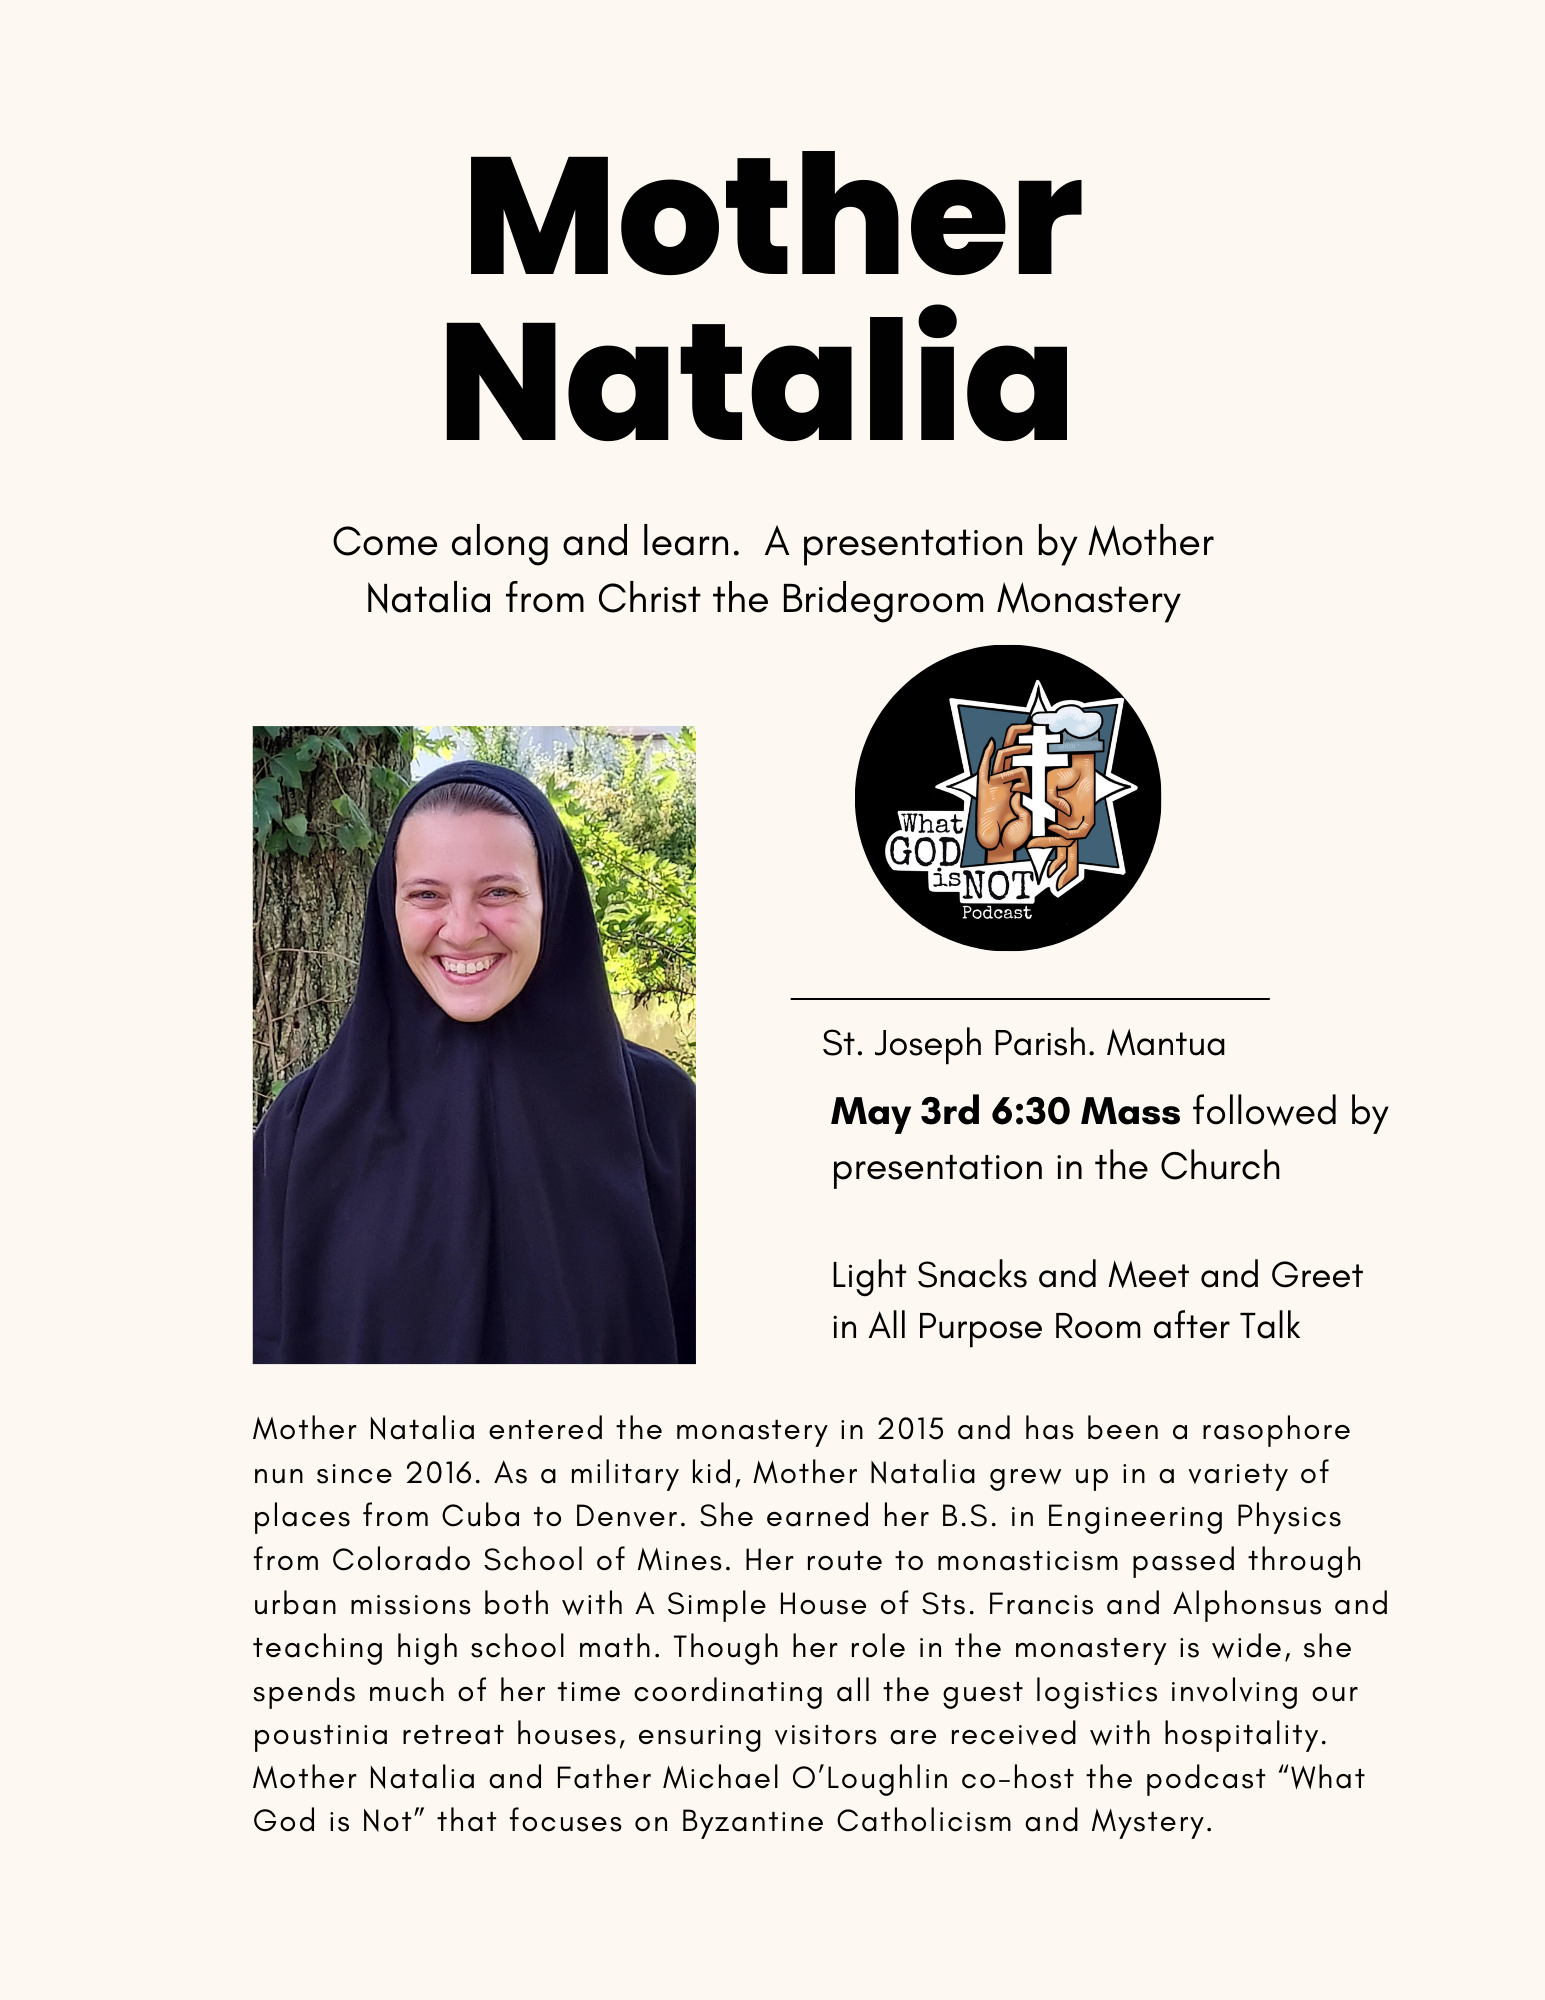 Come along and learn. A presentation by Mother Natalia from Christ the Bridegroom Byzantine Monastery in Burton, Ohio